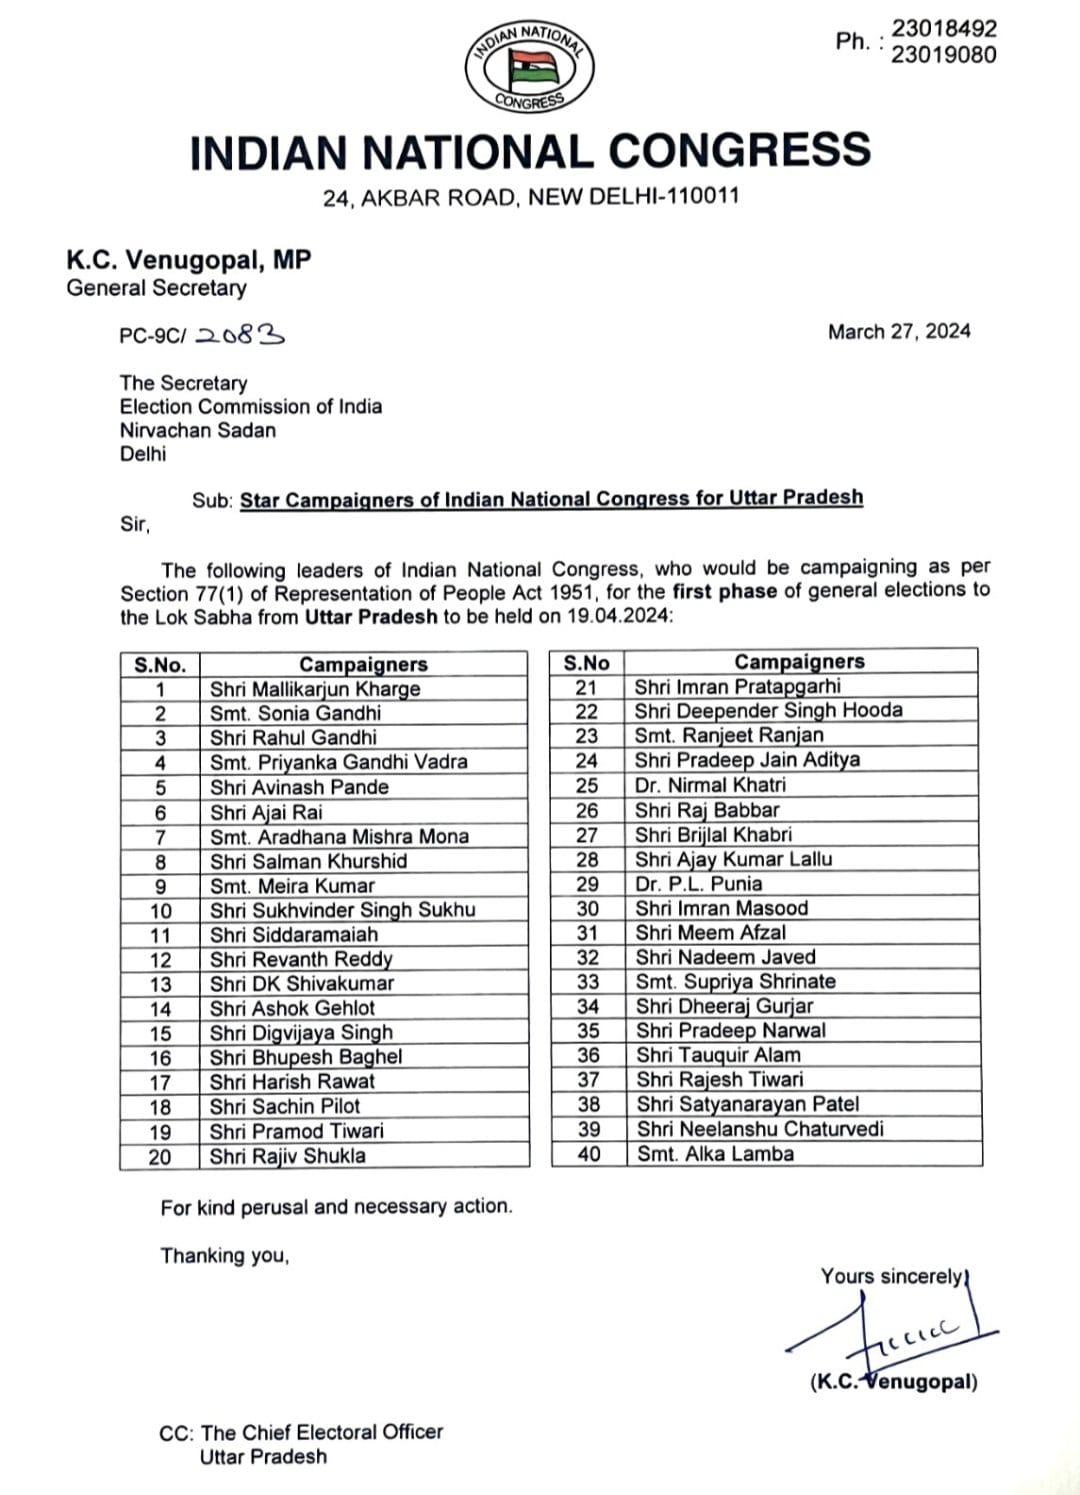 List of Congress star campaigners for UP